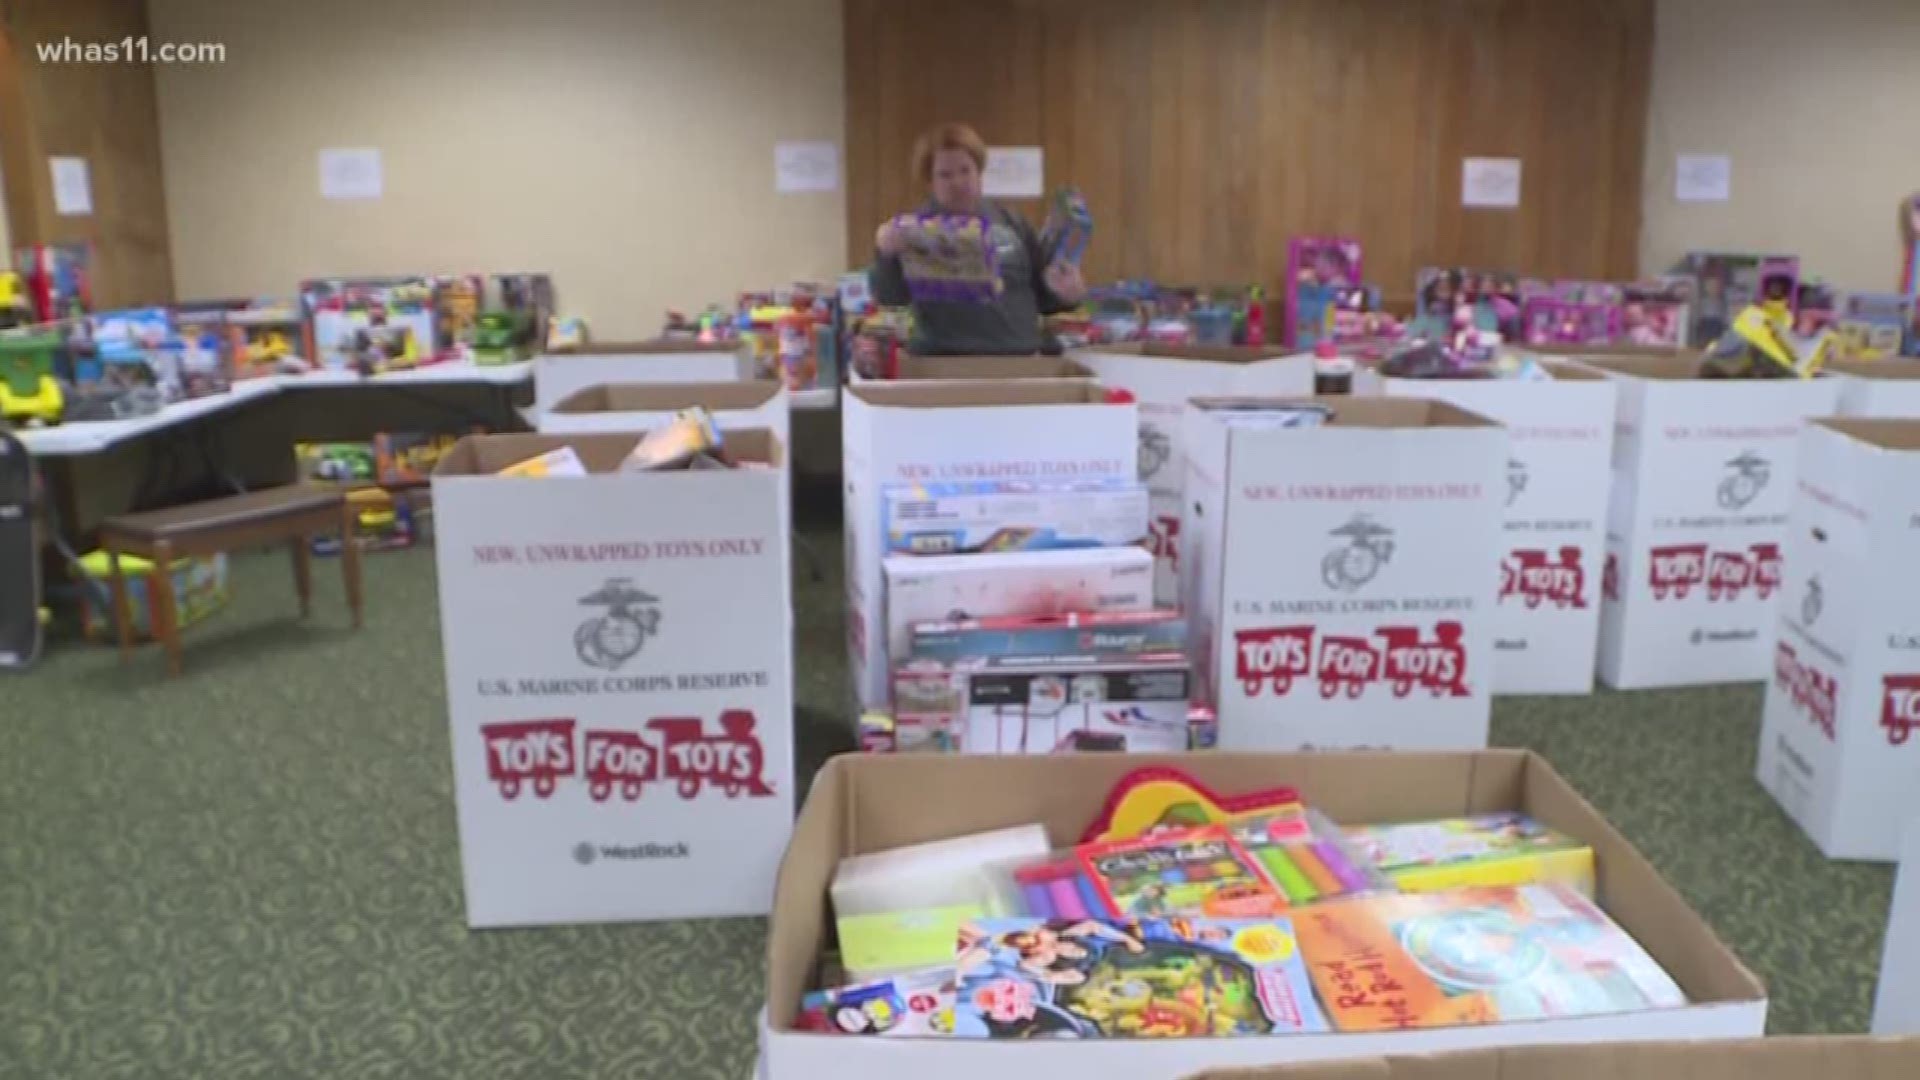 For the 29th year, an organization is offering a way for underprivileged families to shop for their kids for free.